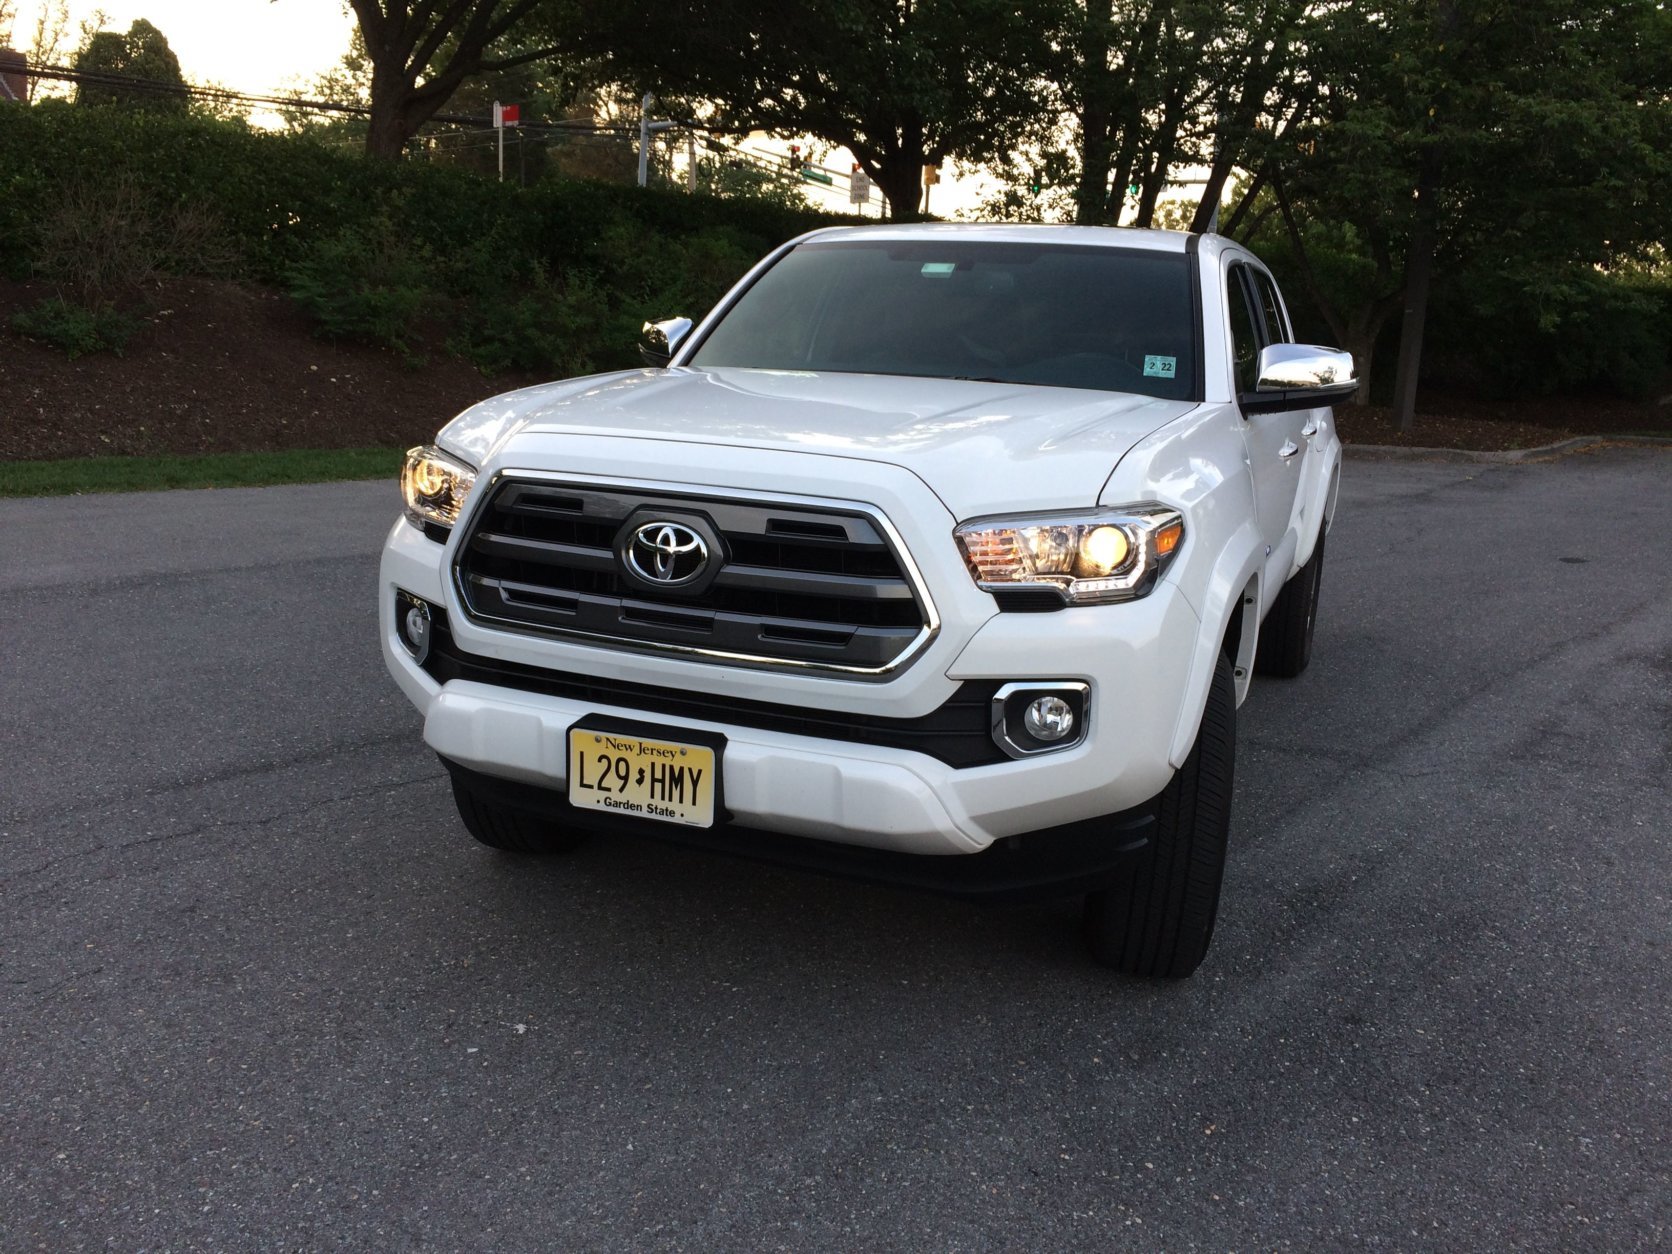 WTOP's car guy Mike Parris said if you want the best Tacoma for normal everyday use, the Limited trim level is the model for you. (WTOP/Mike Parris)